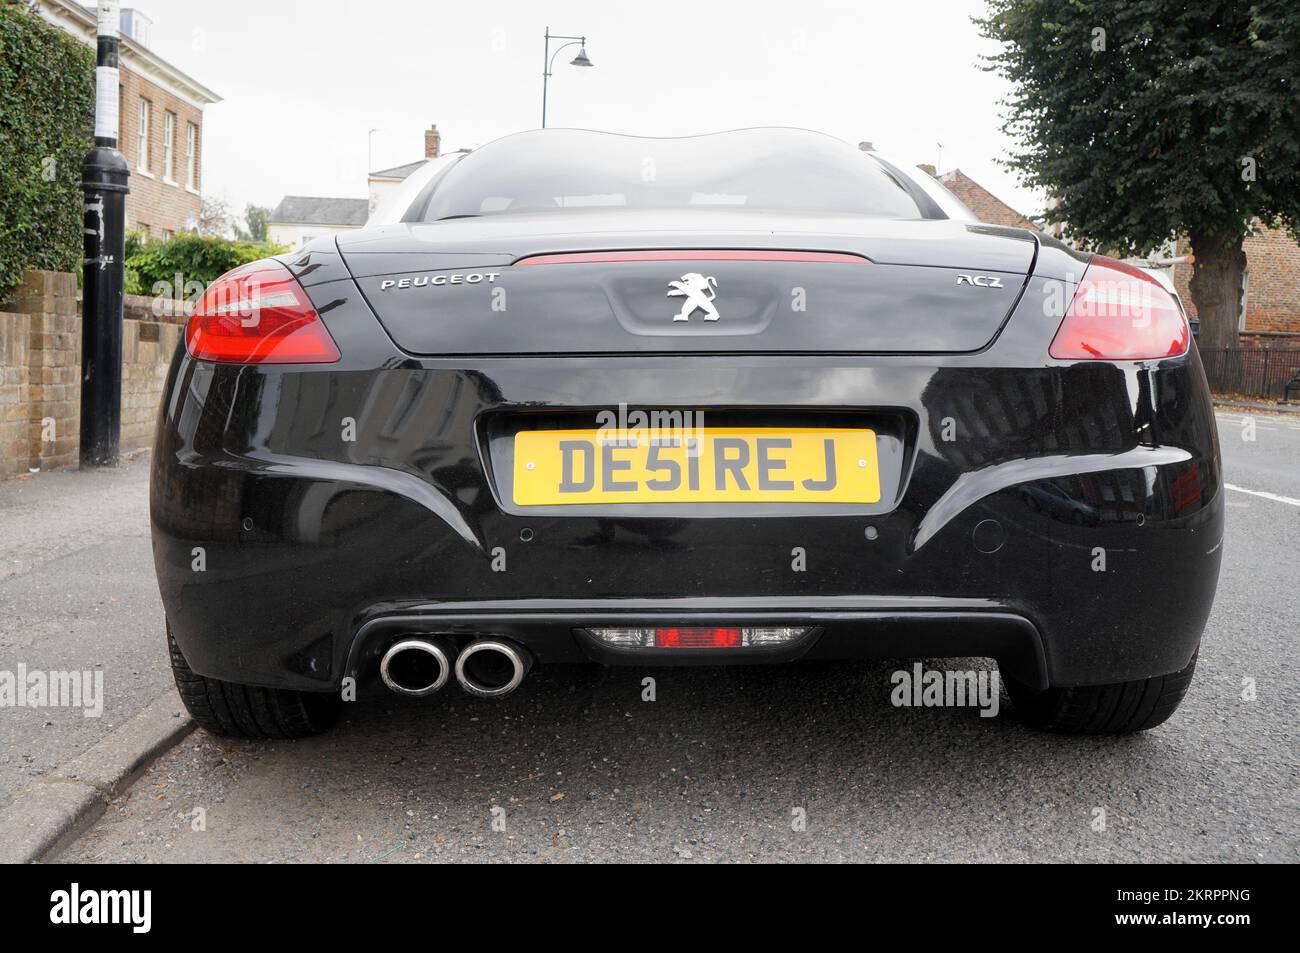 back view of a black Peugeot coupe sports car with DESIRE reg. plate. Stock Photo